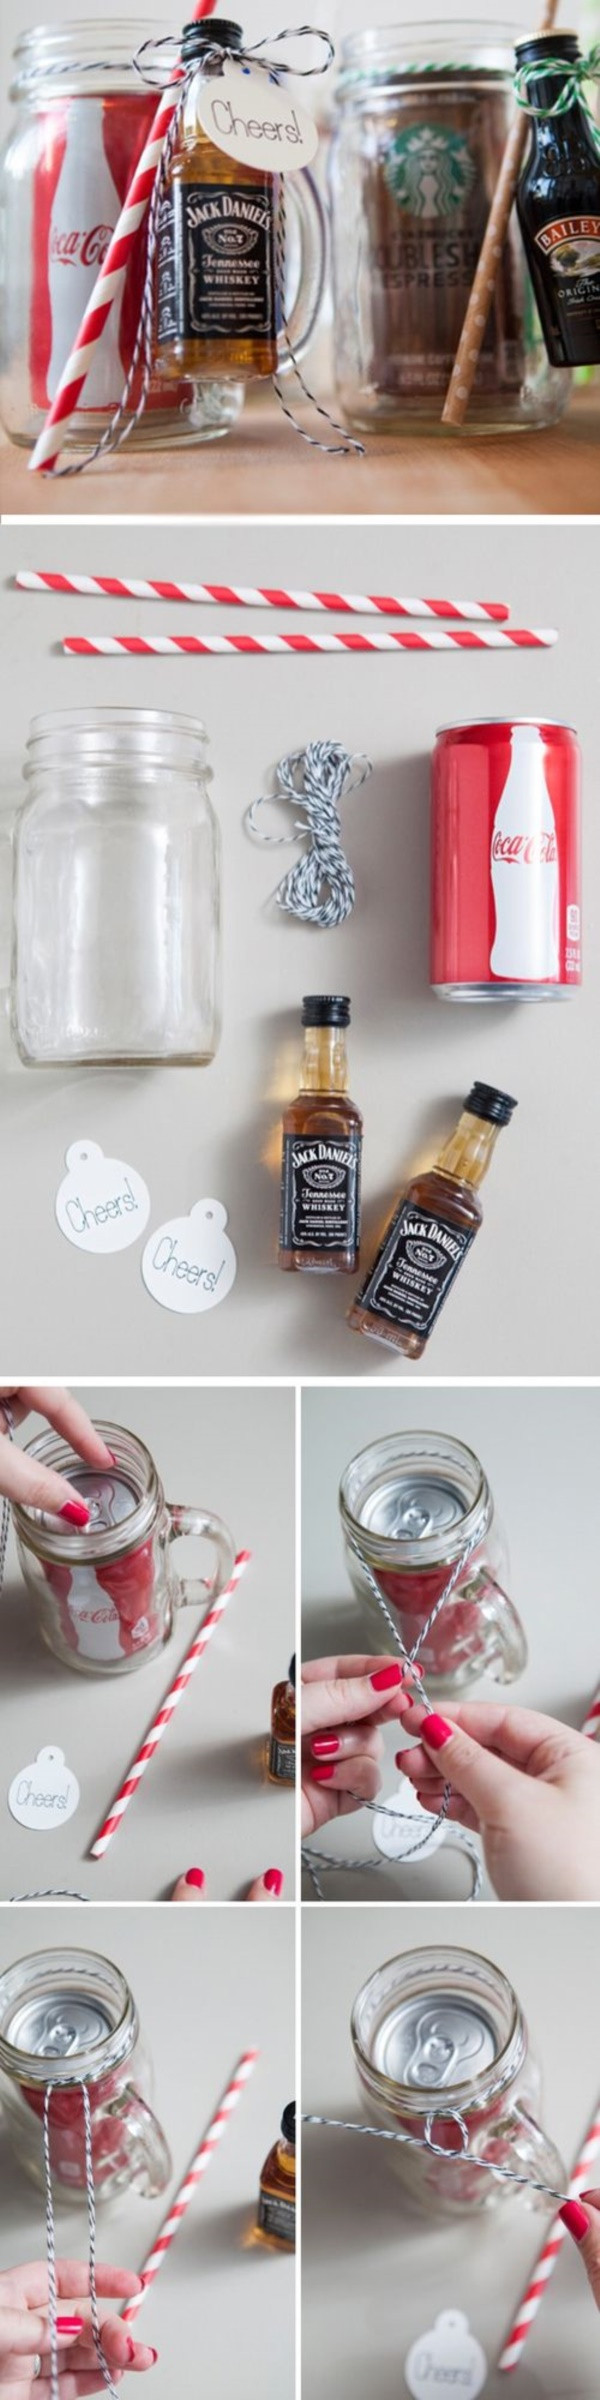 Creative Valentines Day Ideas For Him
 101 Homemade Valentines Day Ideas for Him that re really CUTE